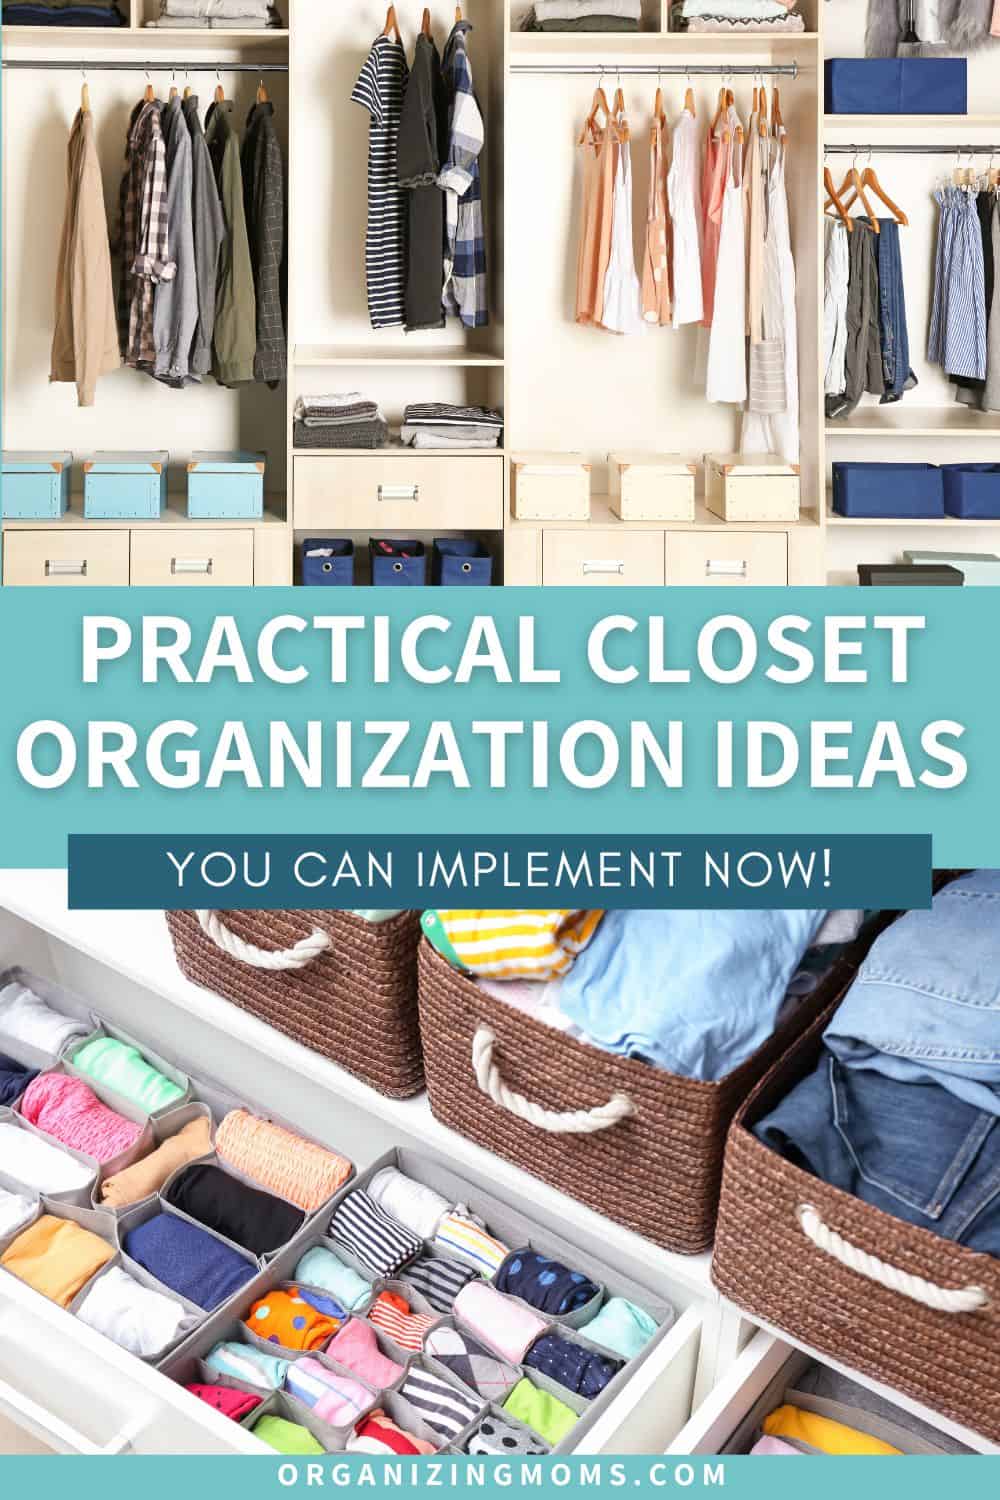 Practical Closet Organization Ideas You Can Implement Now (text), an image of a closet, and an image of baskets and drawers filled with clothes.